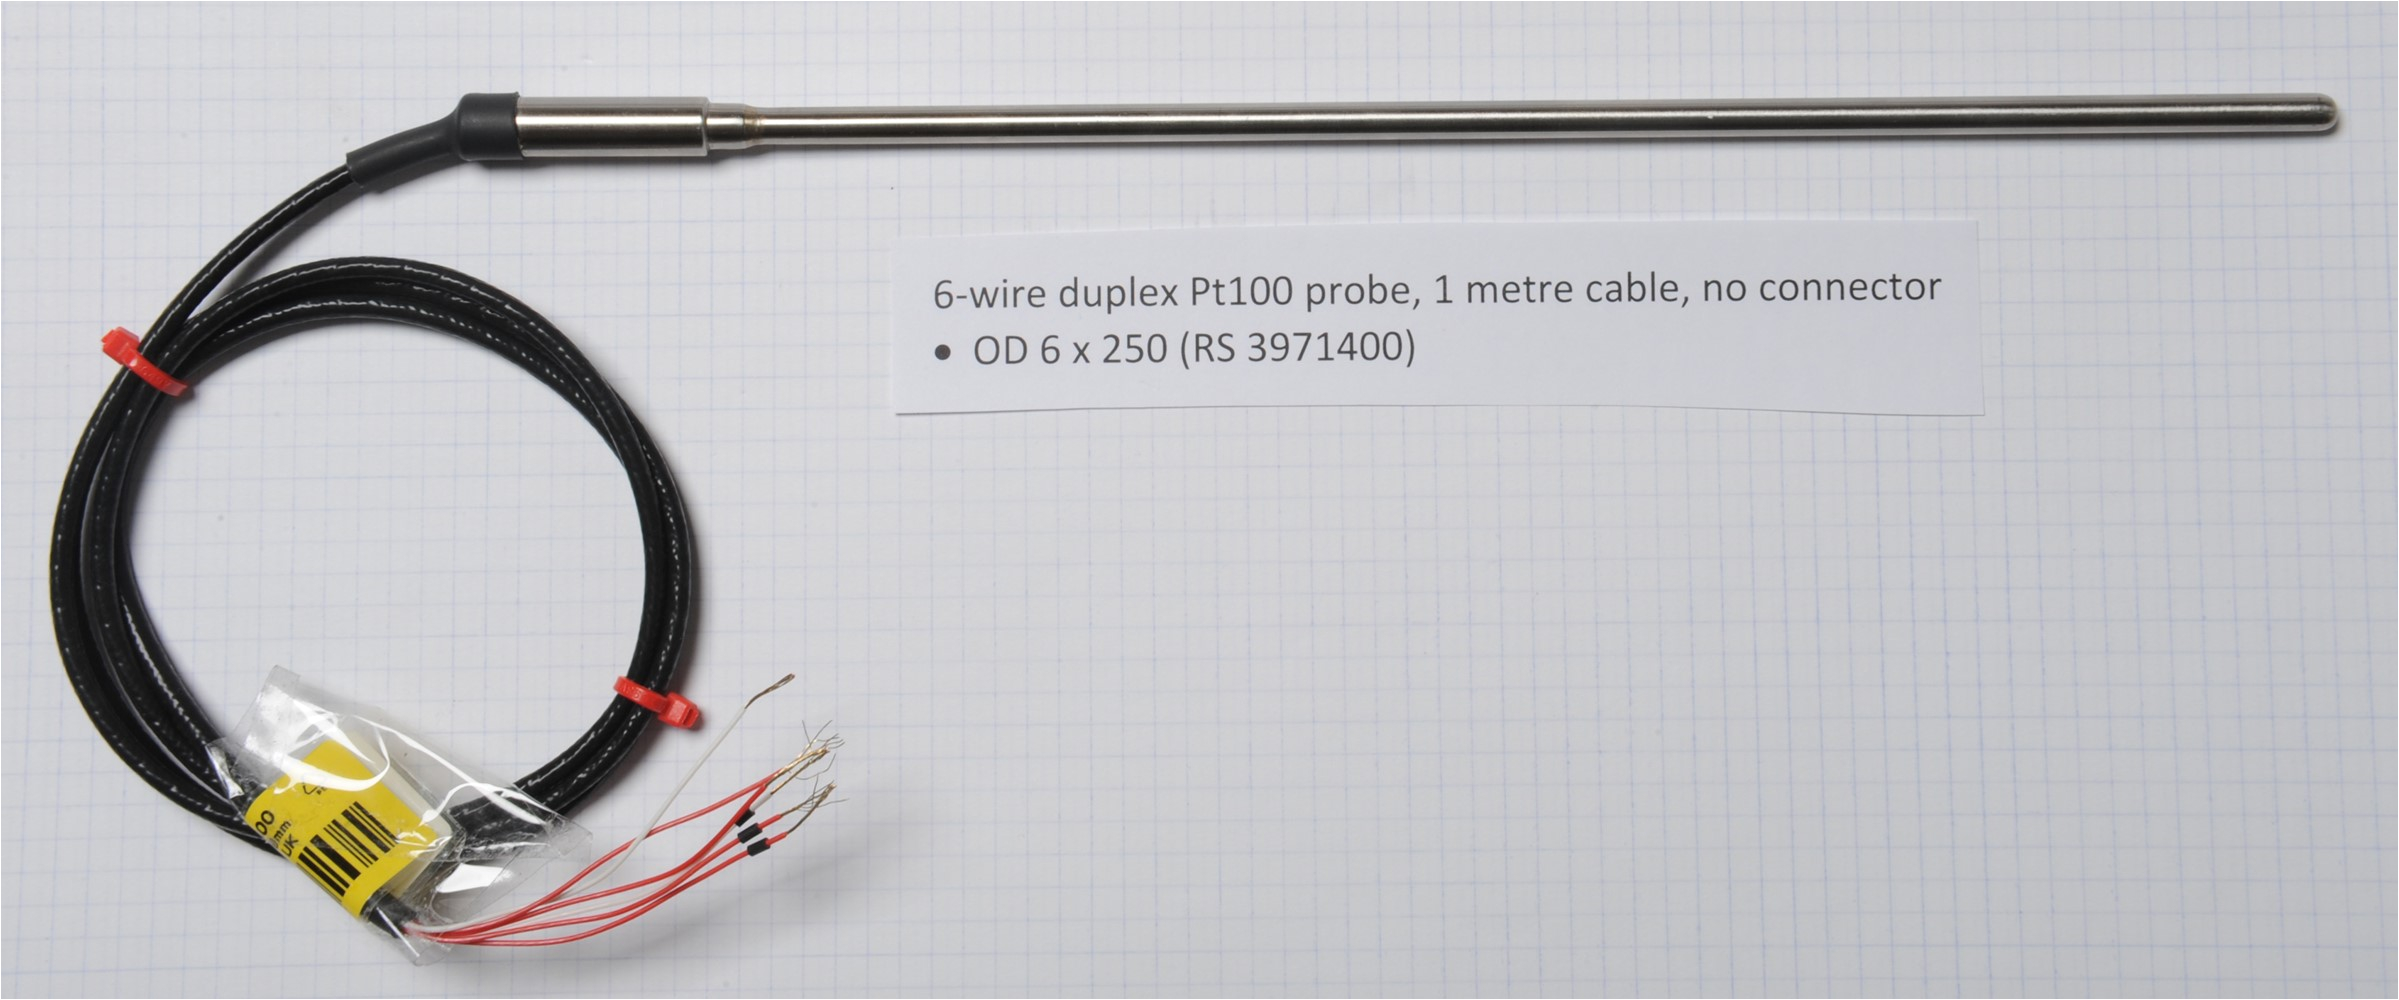 duplex pt100 6 wire probe with 1 metre cable and no connector